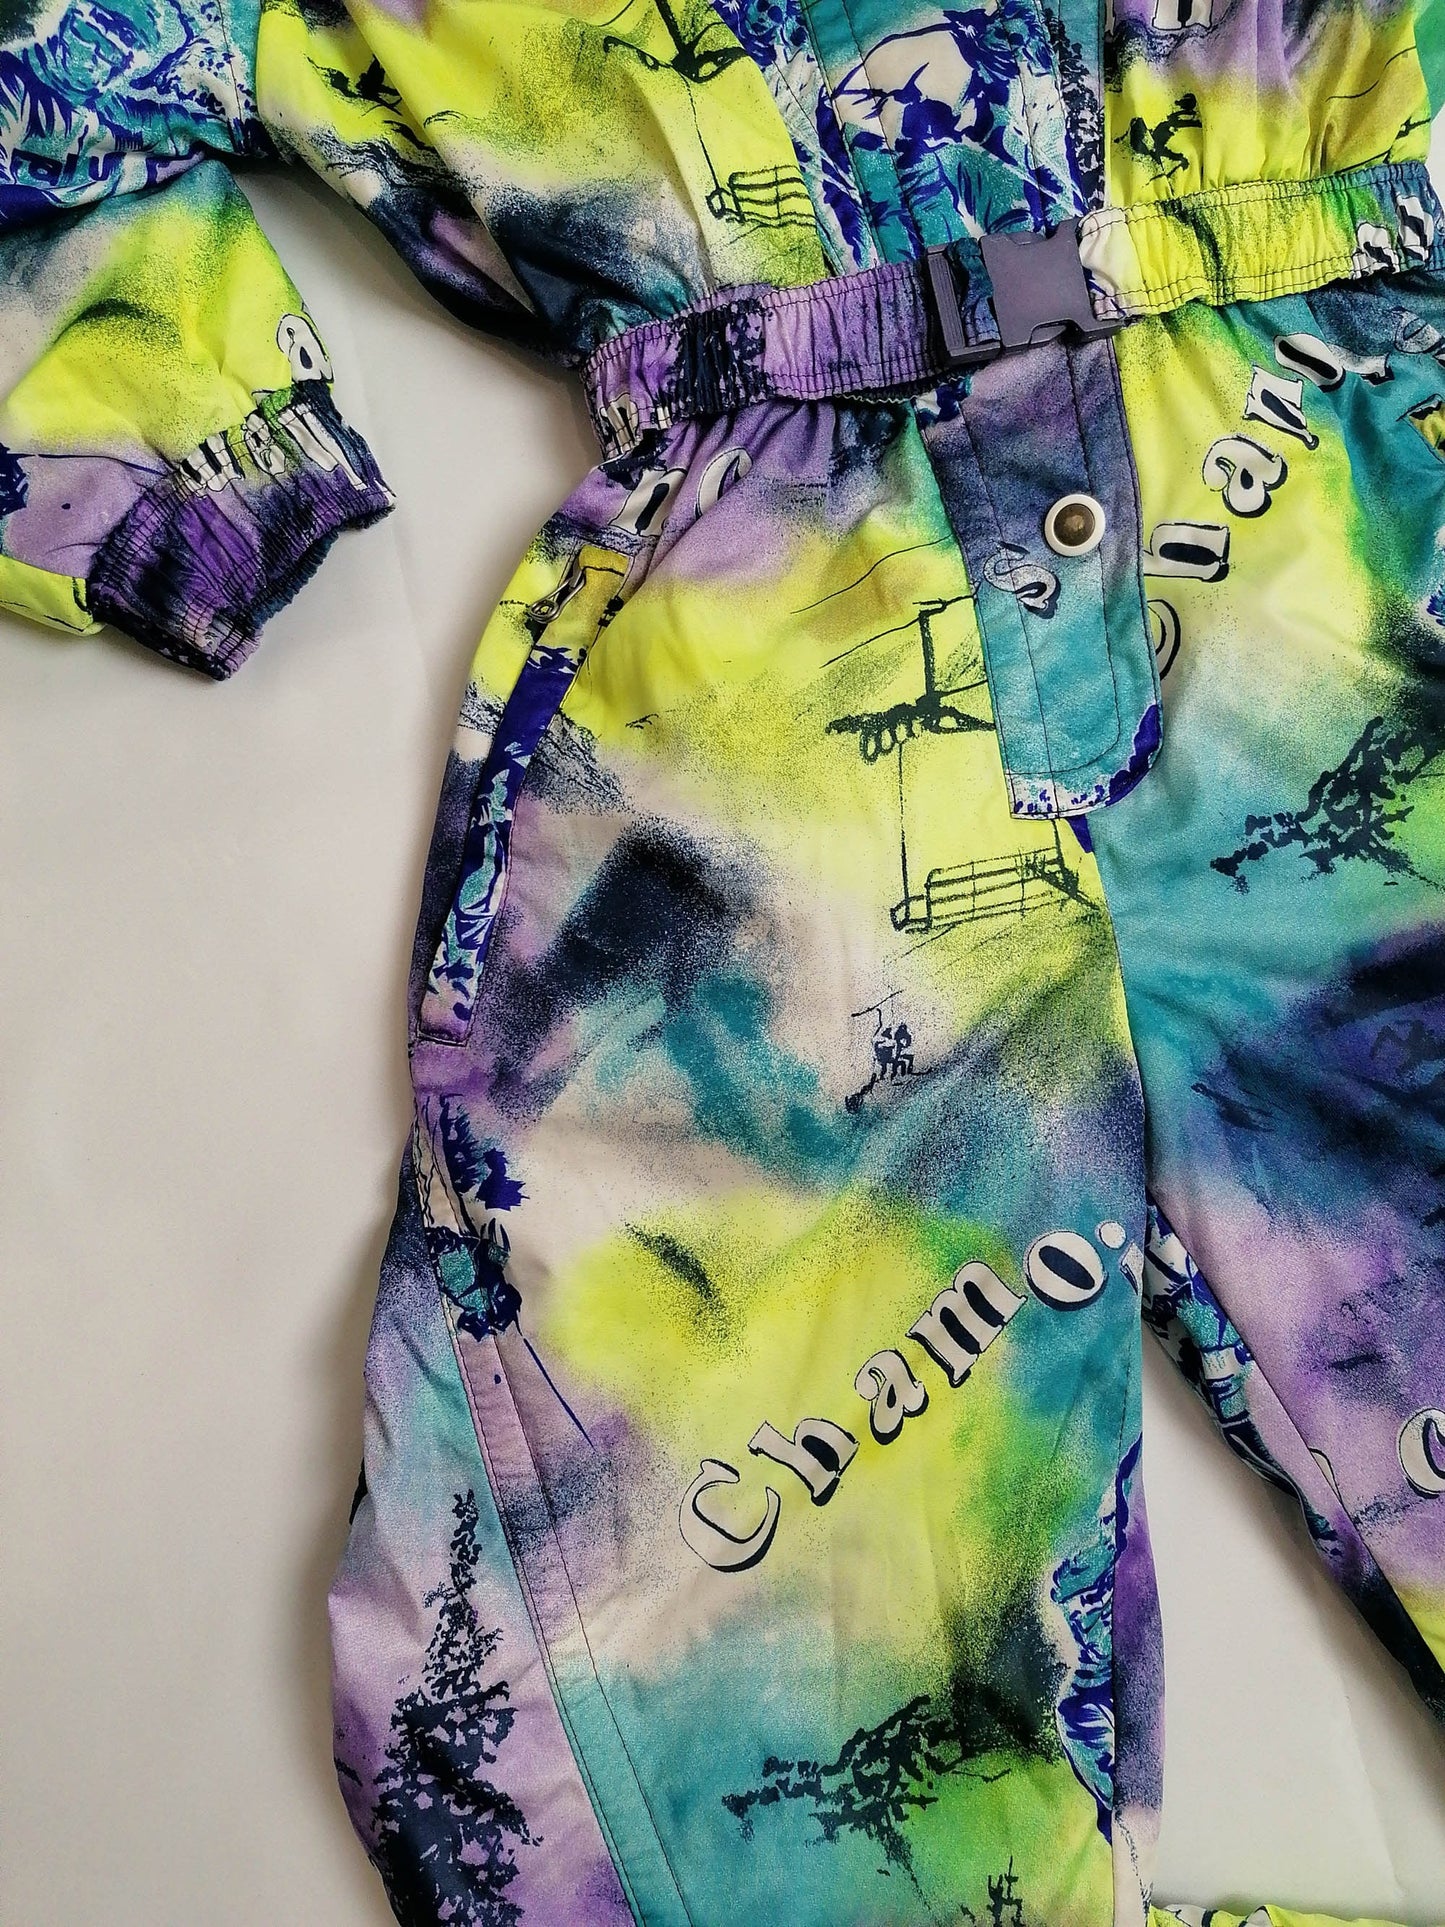 80's 90's Made in Finland Tie-Dye Ski Suit - size S-M